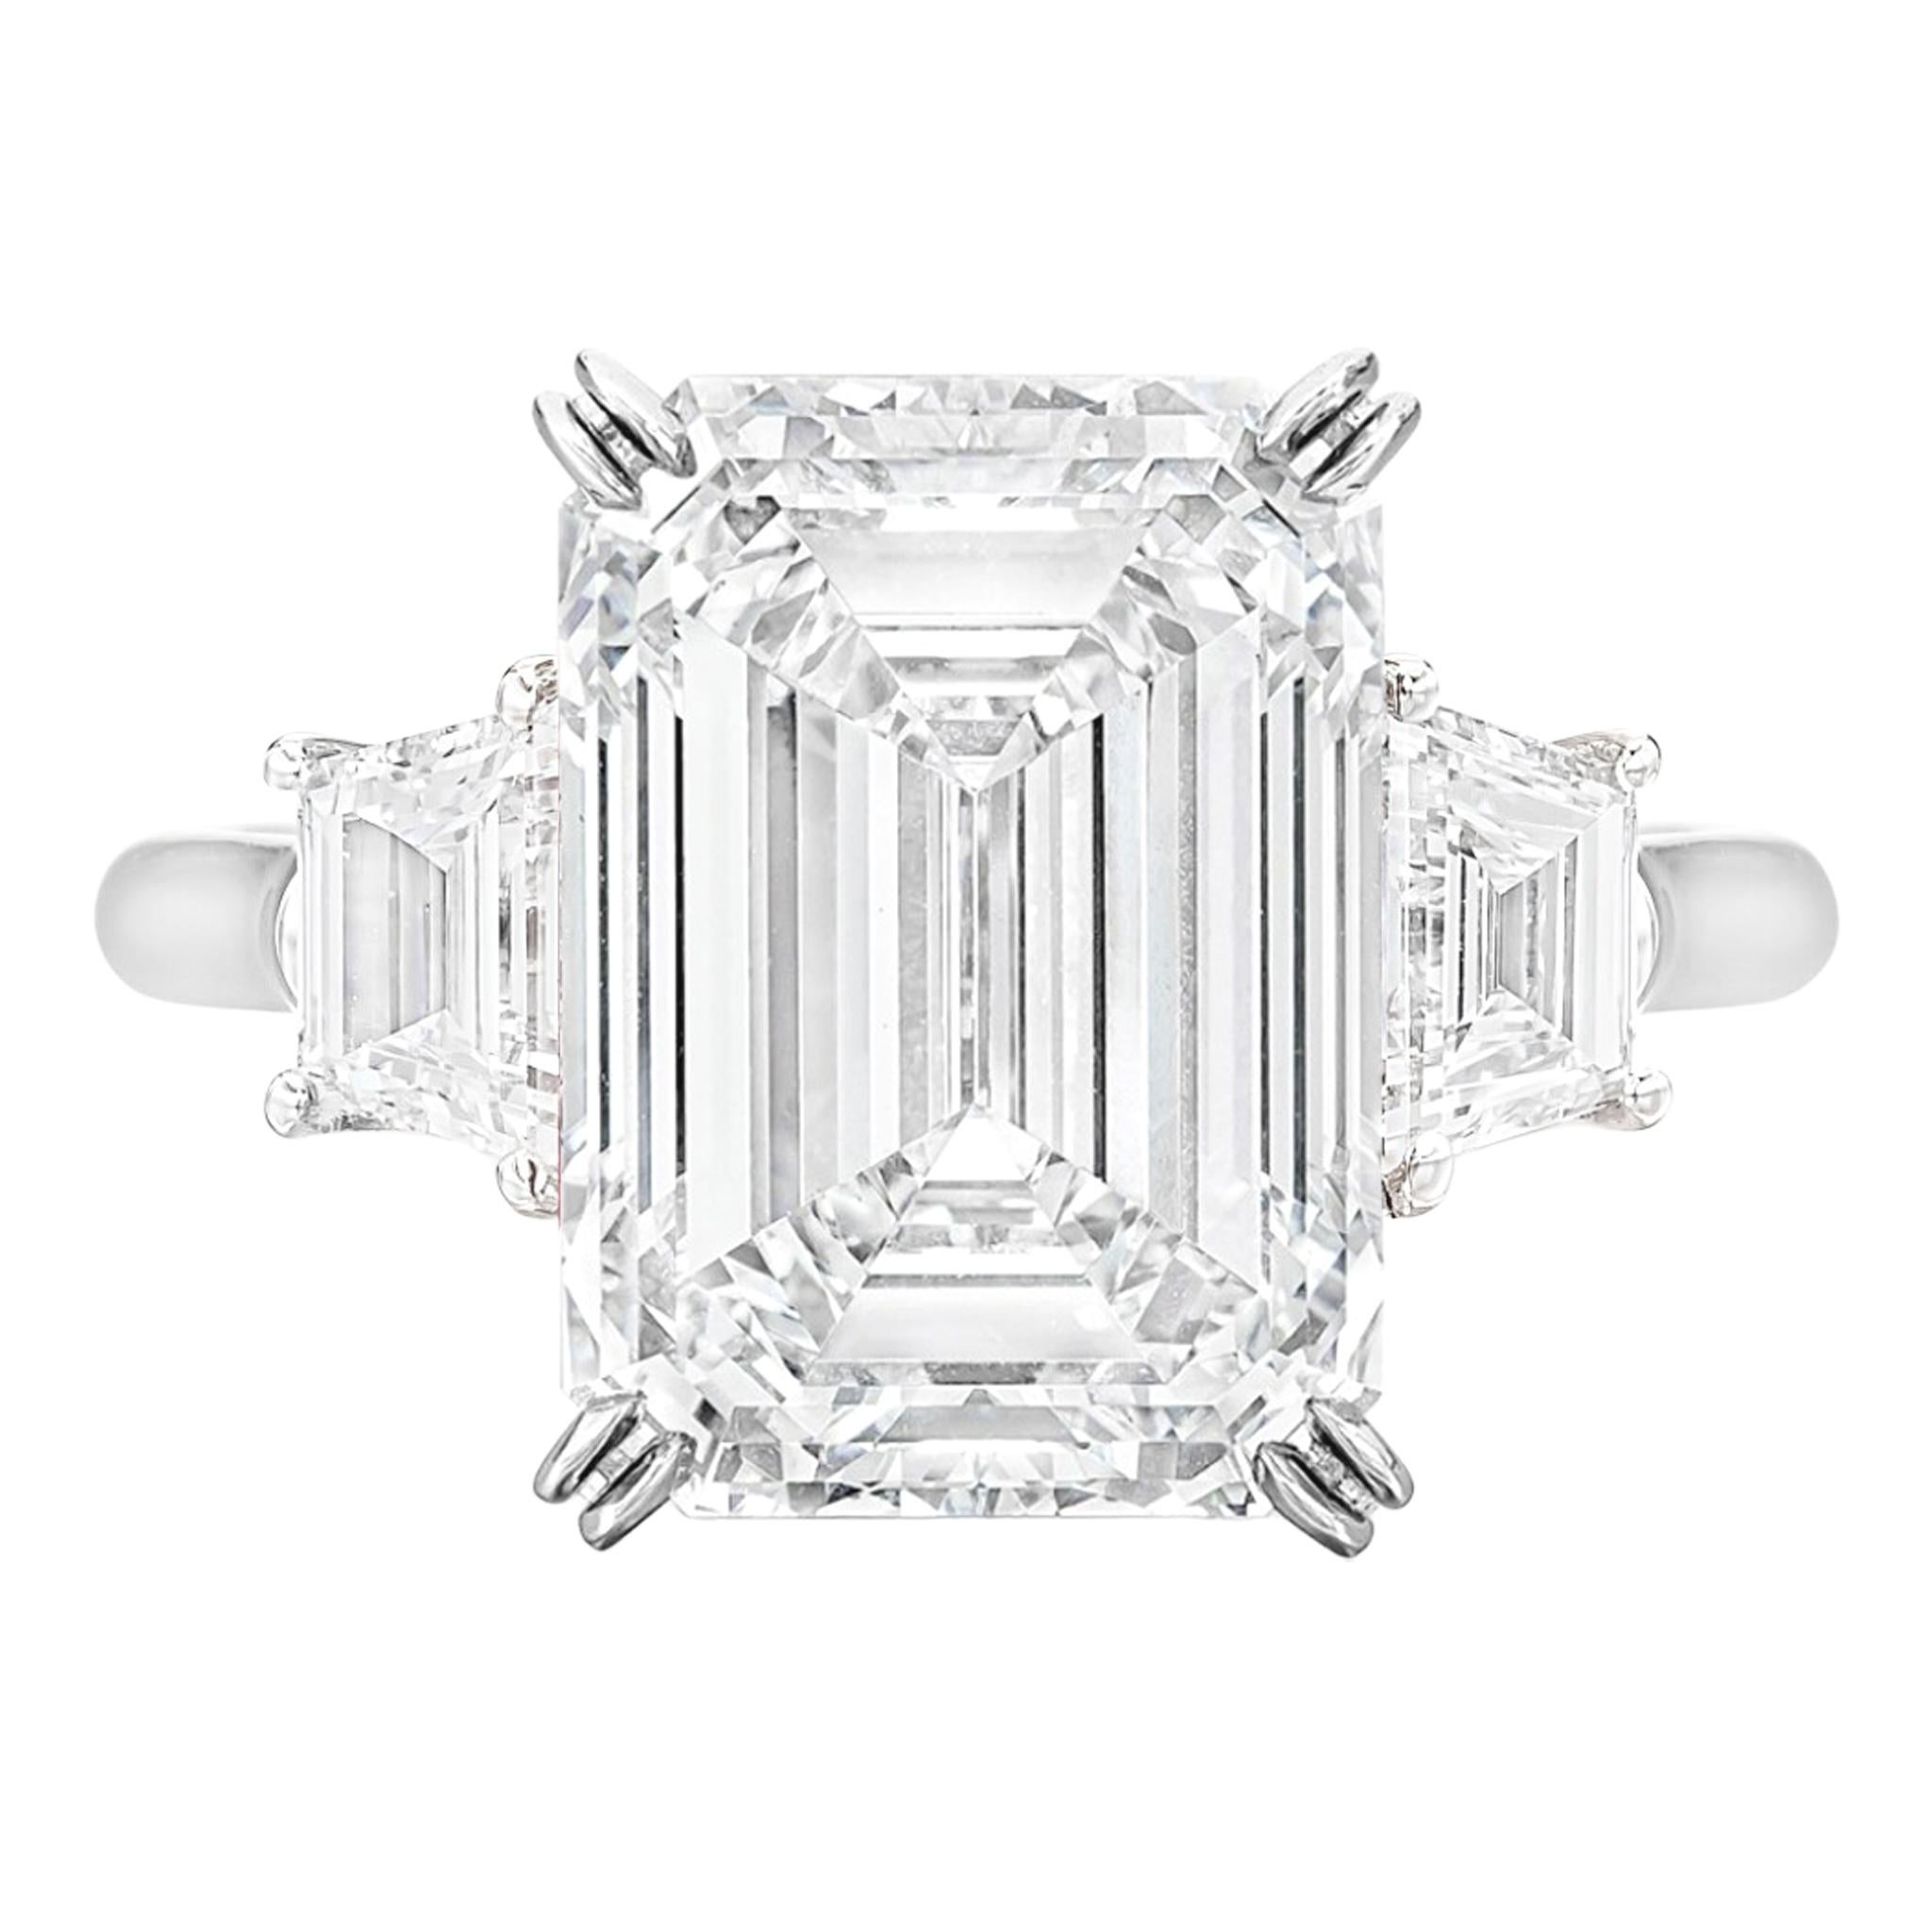 Beautiful ring with an amazing 10 carat emerald cut diamond ring. The frame is in platinum

Overall it is an extraordinary diamond.